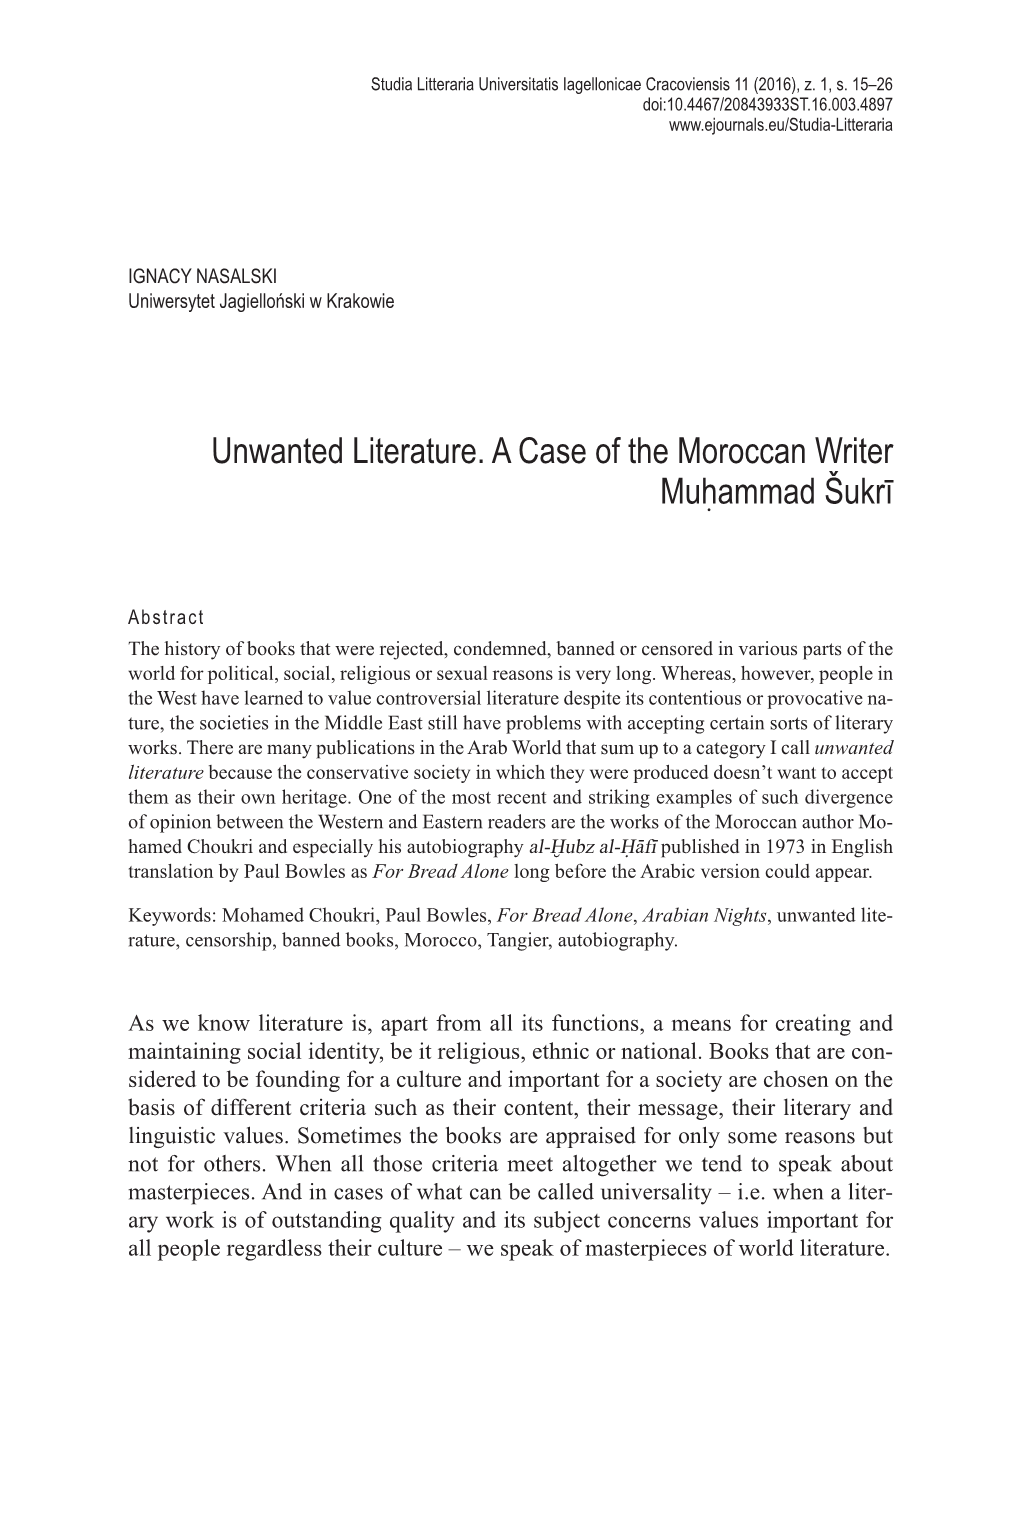 Unwanted Literature. a Case of the Moroccan Writer Muhammad